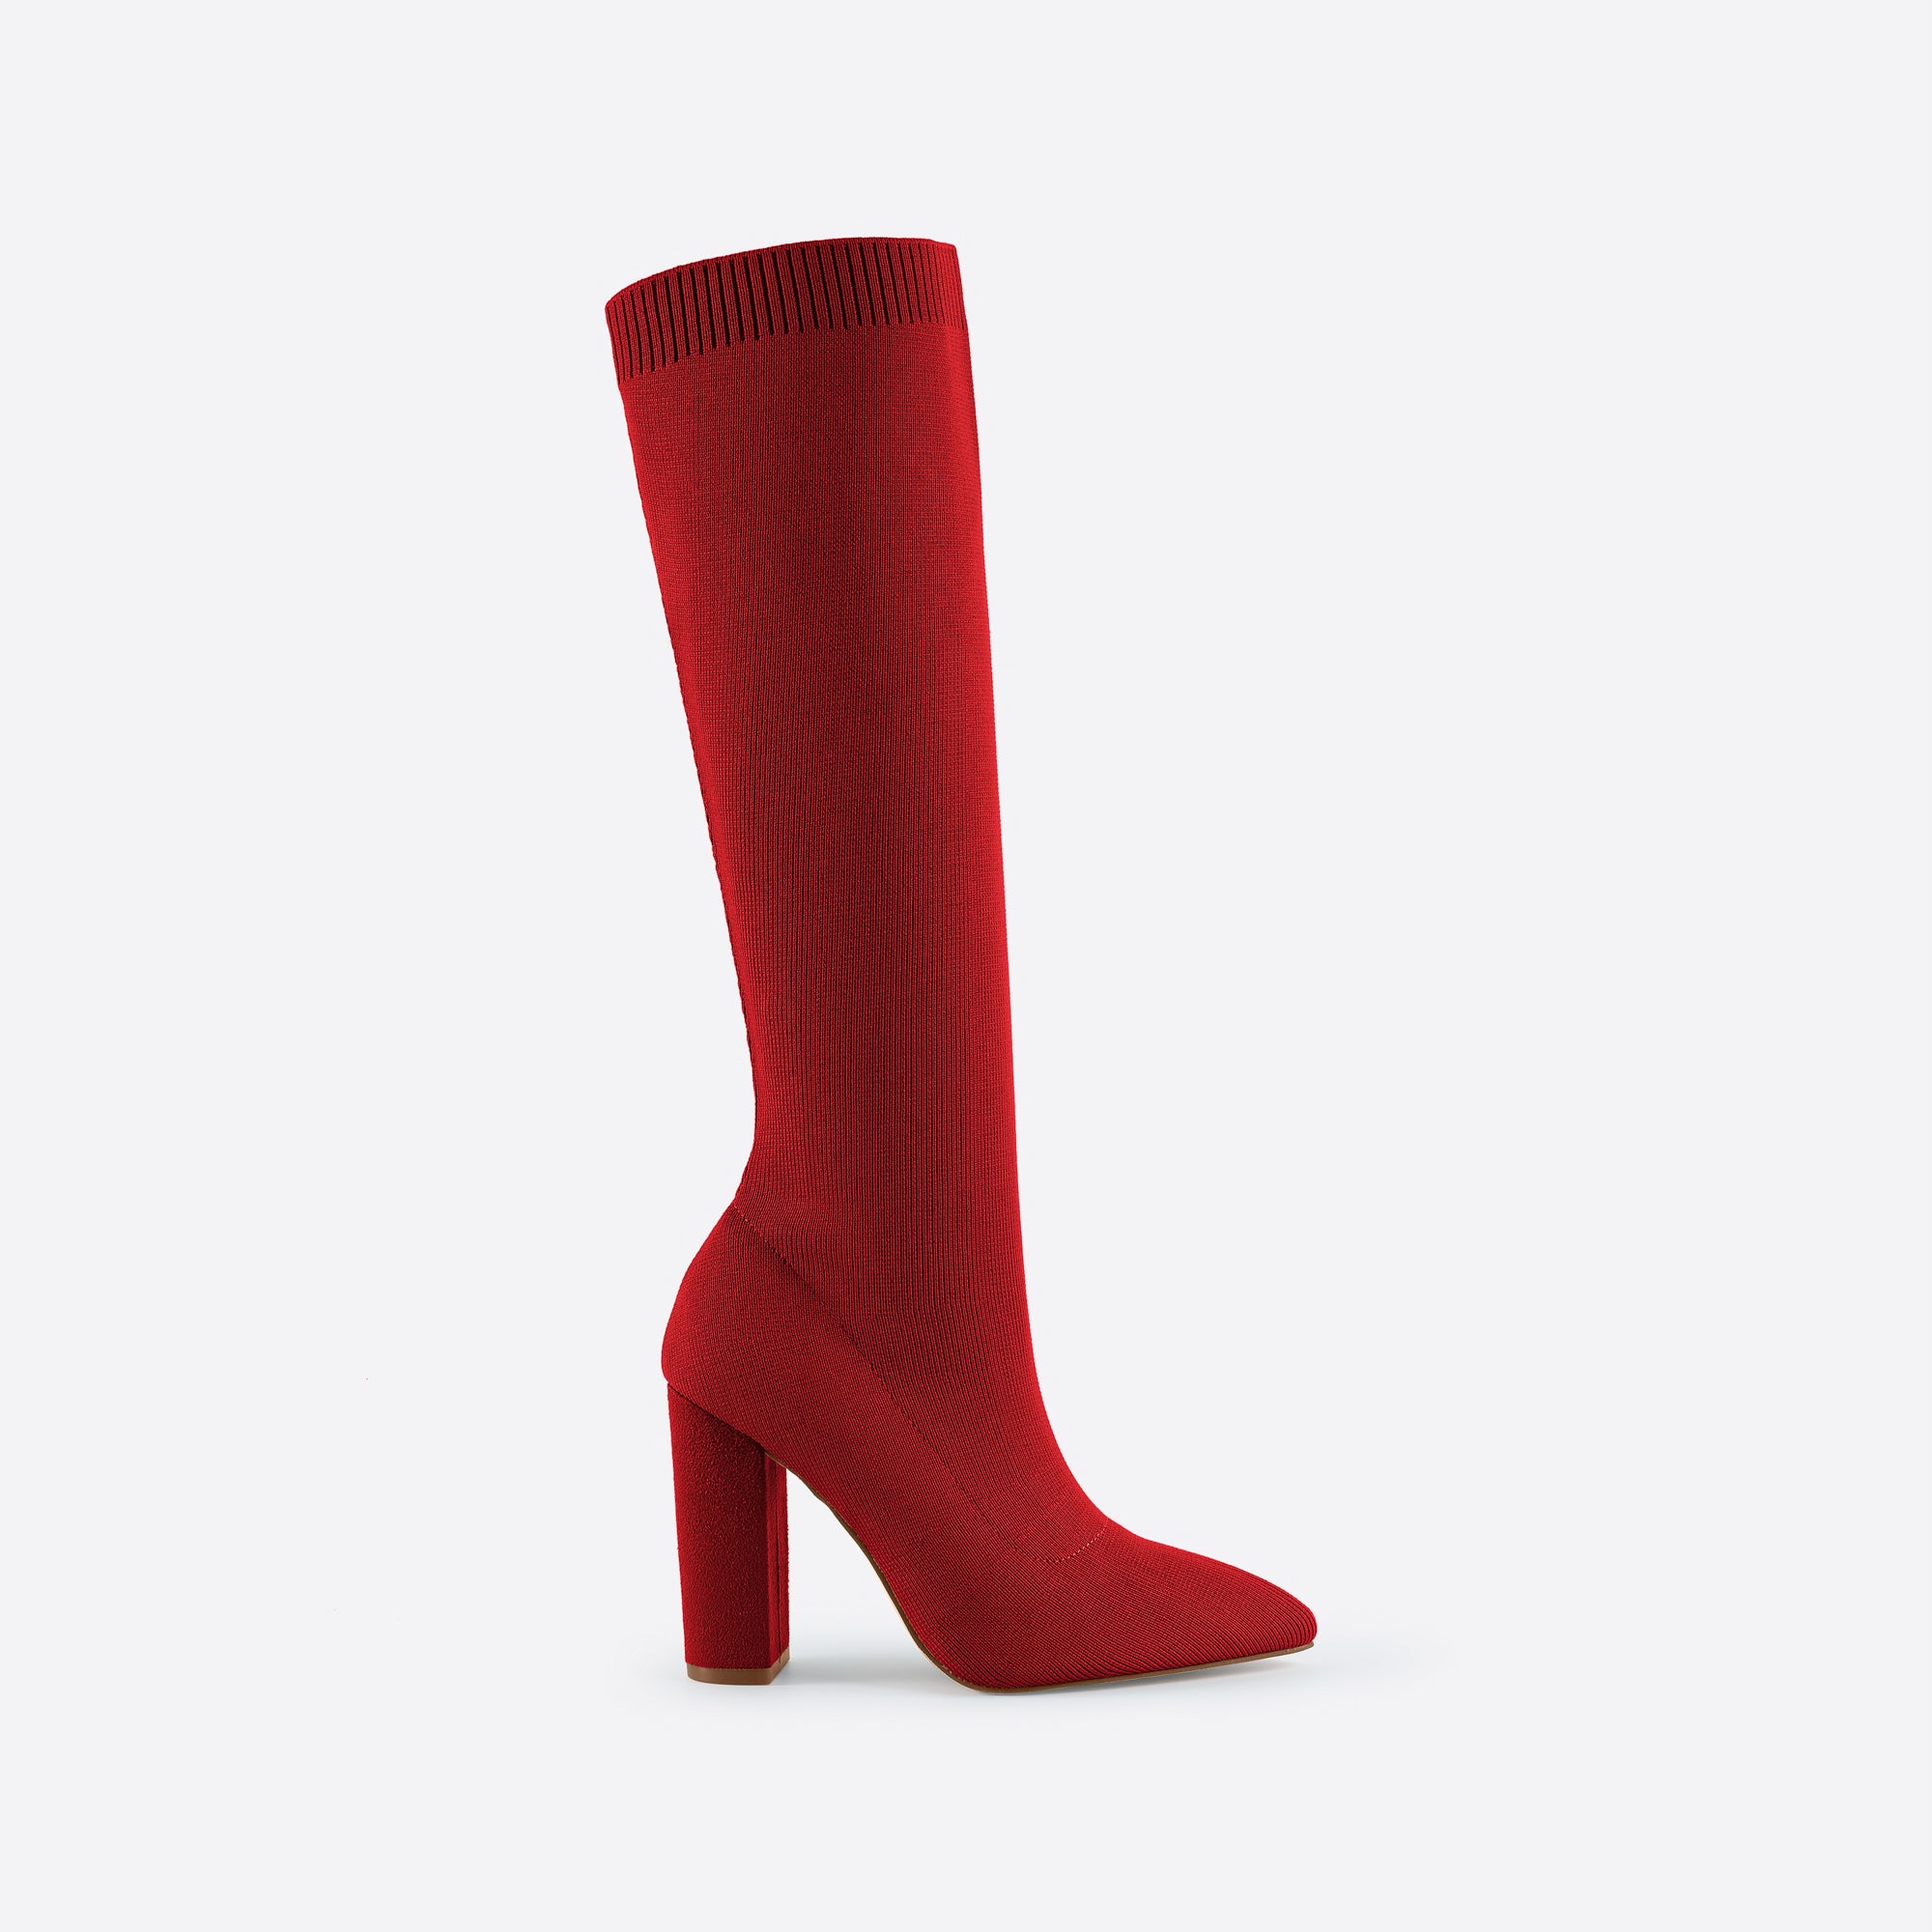 MOUSSE FIT Women Pointed Toe Sock Boots